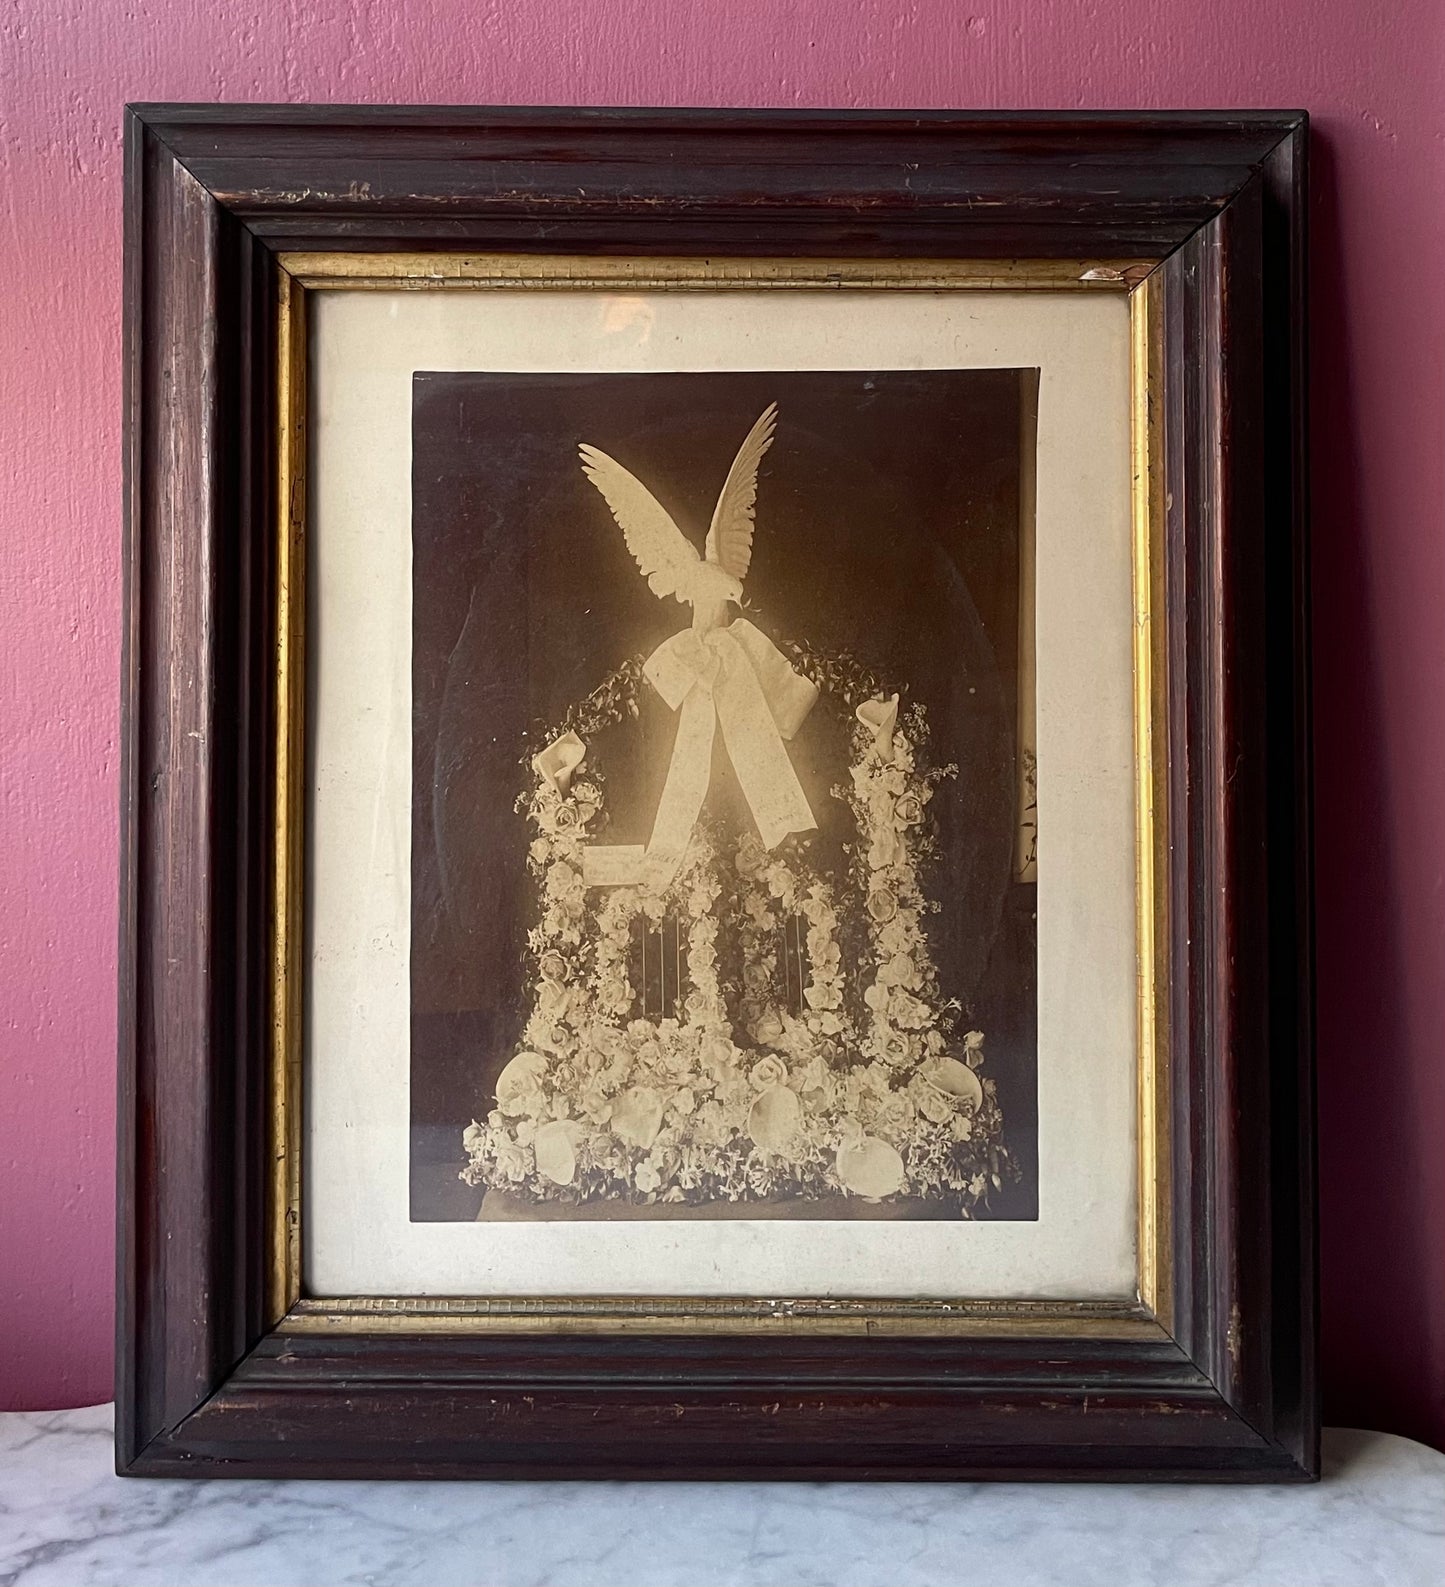 Victorian Memorial Photo | Large Format Funeral Flowers with Dove in Wooden Frame | The Gates Ajar